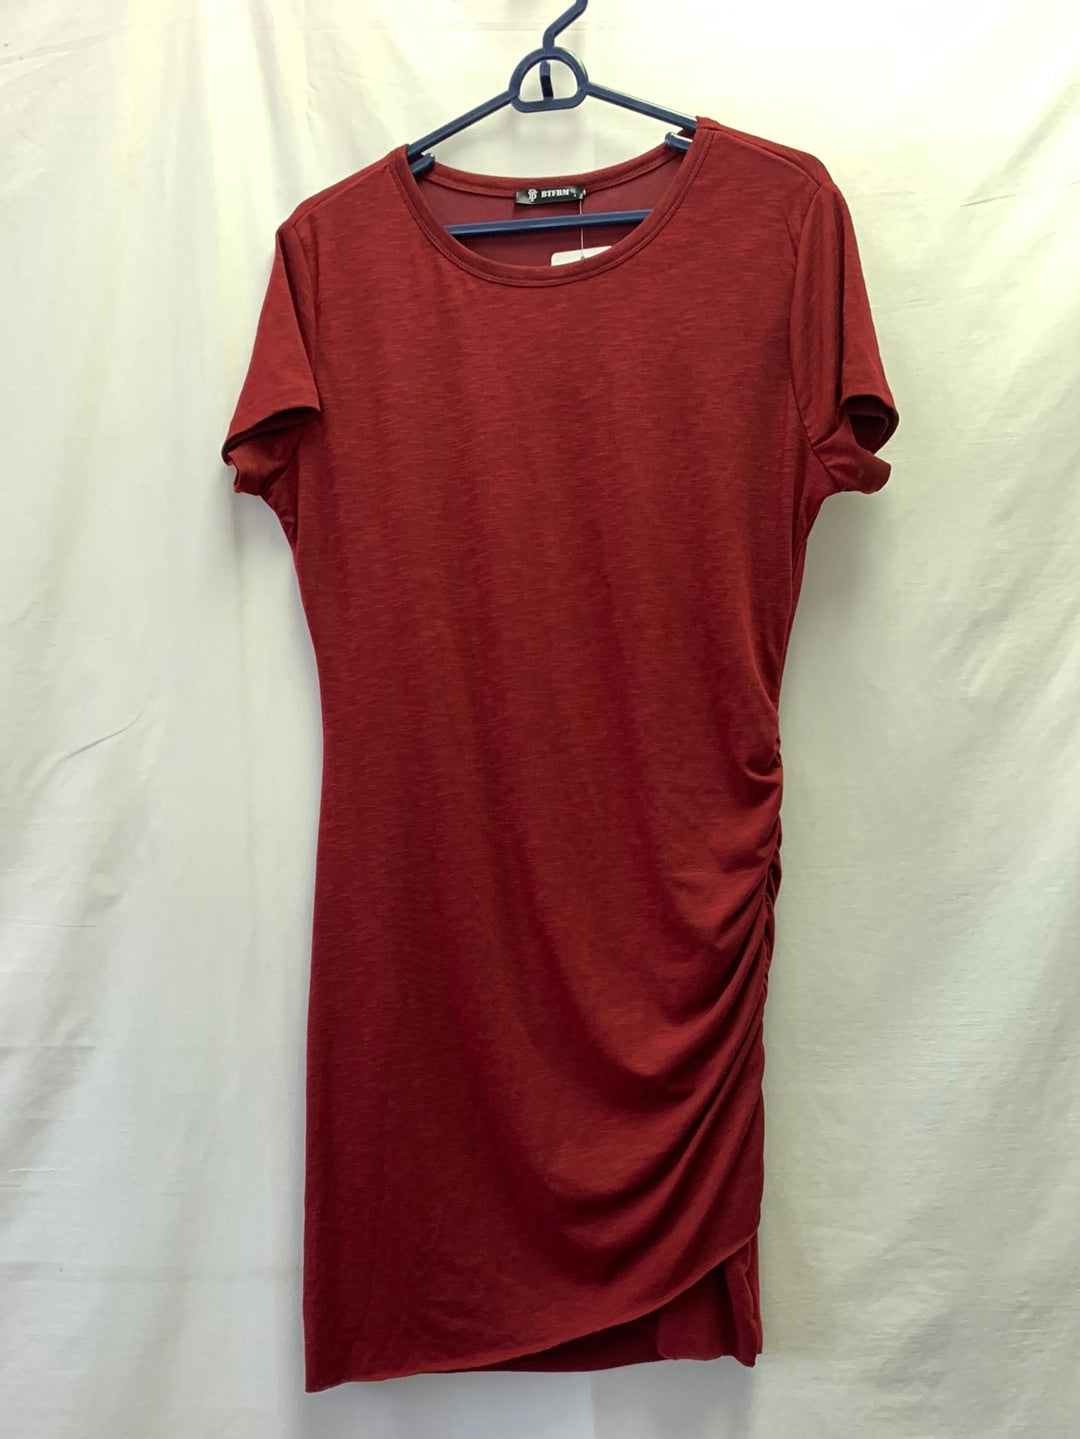 NWT - BTFBM wine red Short Sleeve Ruched Bodycon Mini Dress - Large